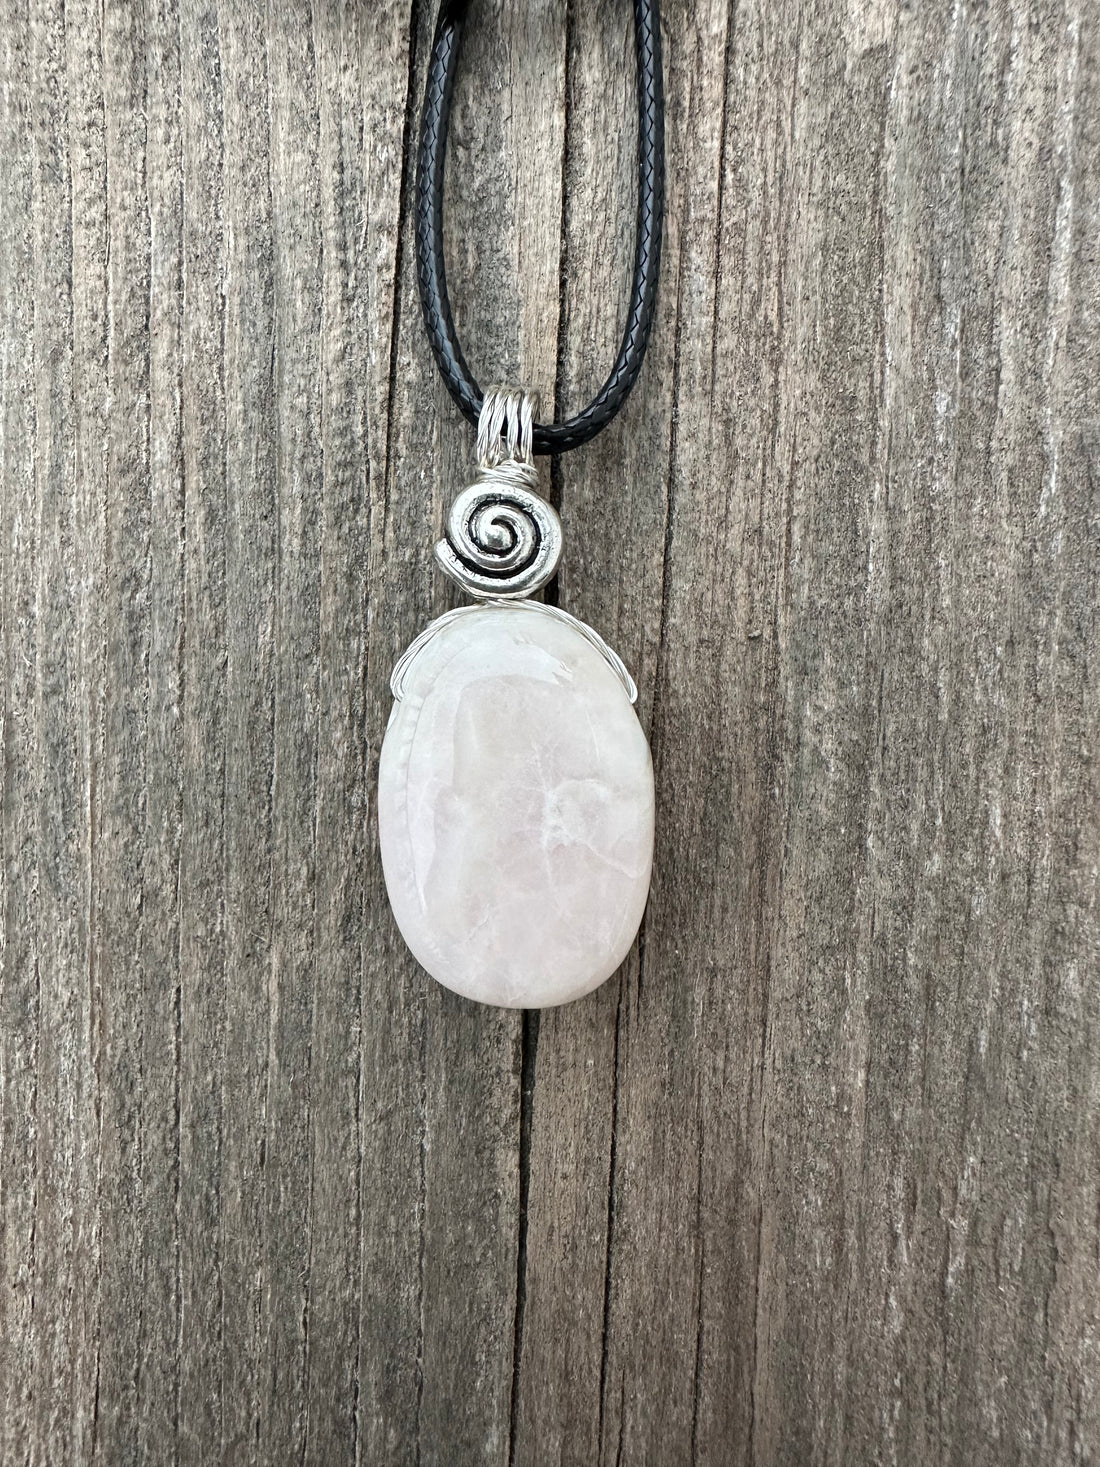 Pink Calcite (Mangano Calcite) Pendant for Opening Awareness. Swirl to Signify Consciousness.